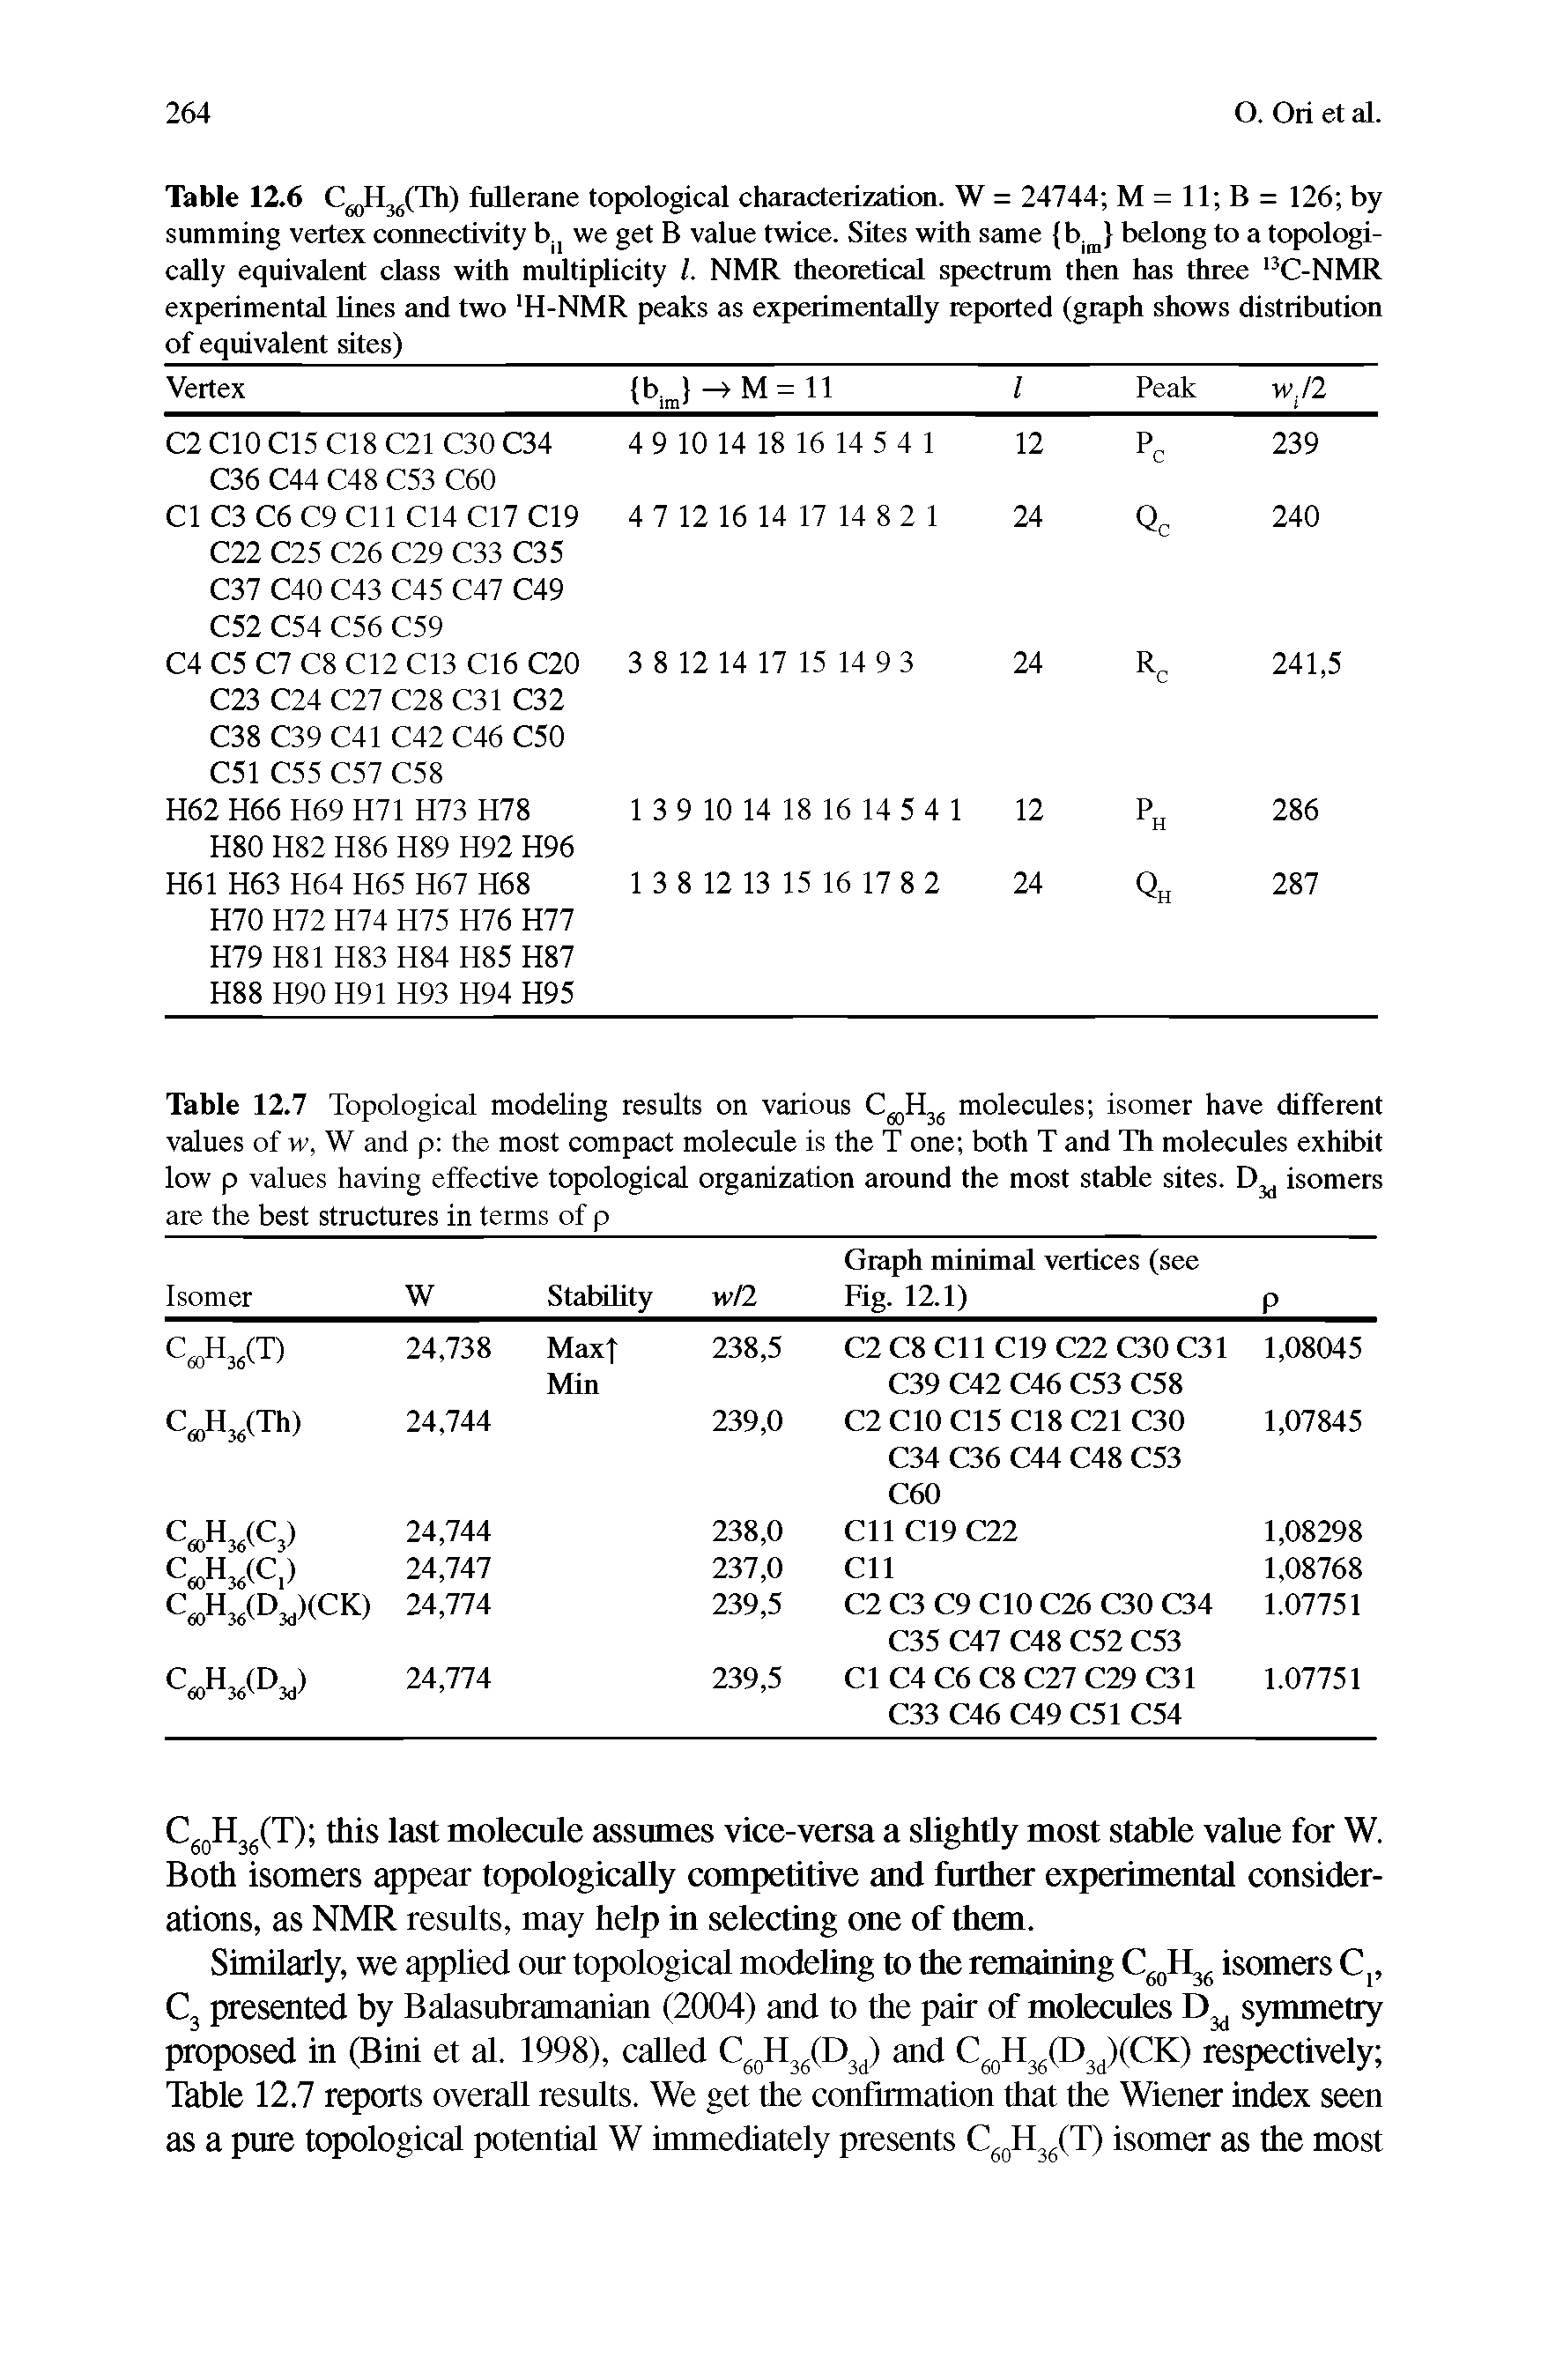 Table 12.7 Topological modeling results on various C60H36 molecules isomer have different values of w, W and p the most compact molecule is the T one both T and Th molecules exhibit low p values having effective topological organization around the most stable sites. DM isomers are the best structures in terms of p...